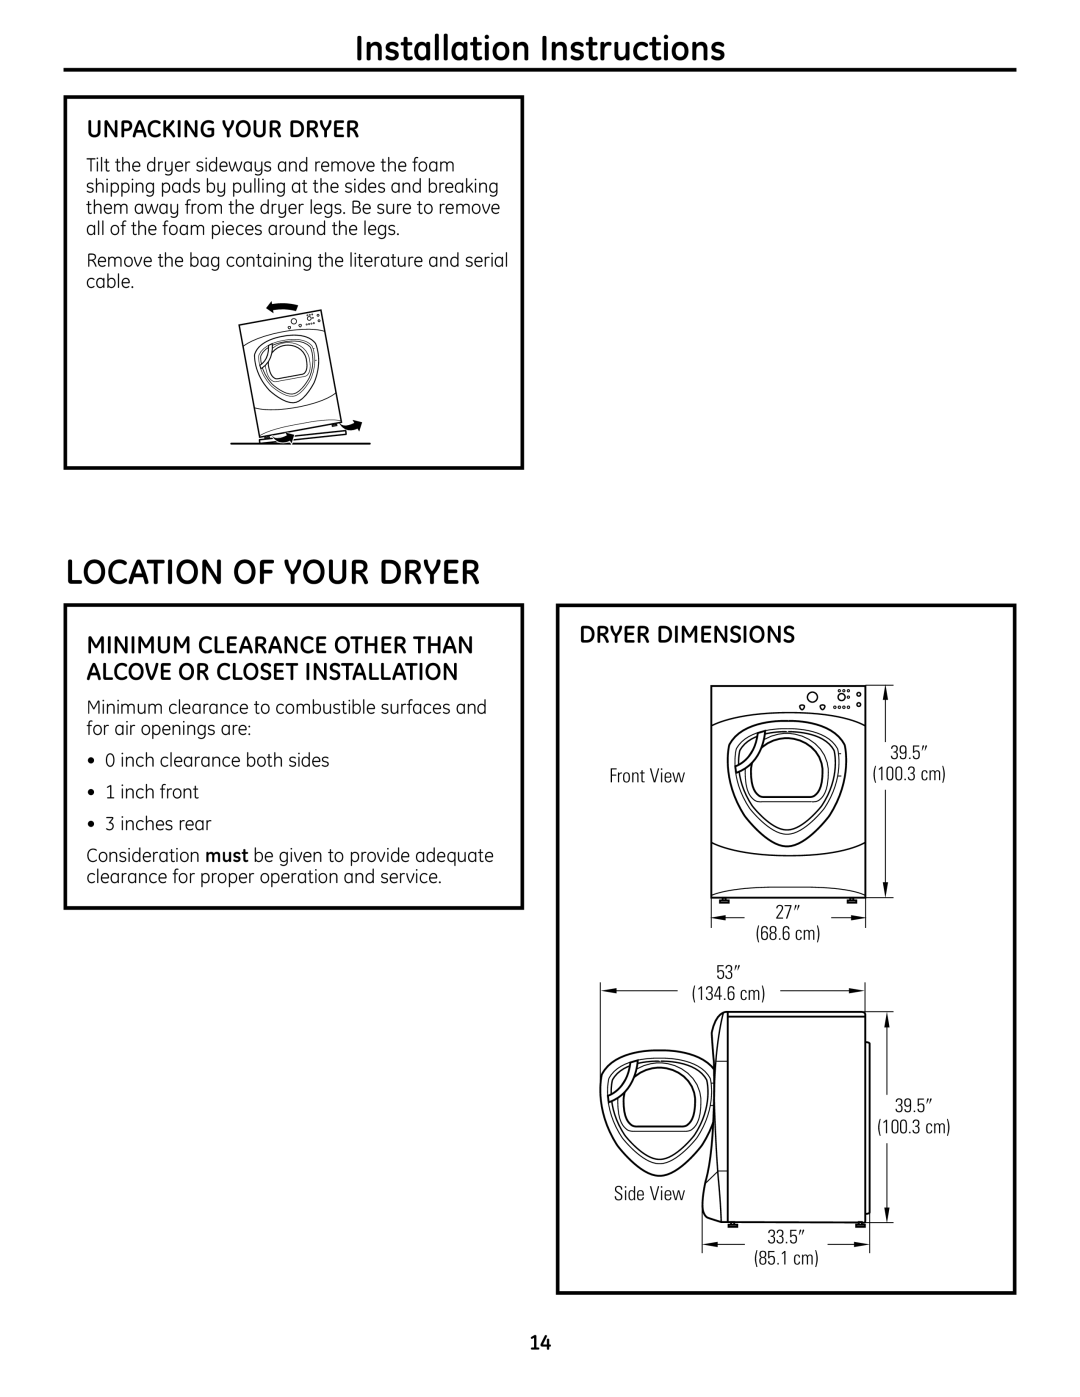 GE UPVH890 Installation Instructions, Location Of Your Dryer, Unpacking Your Dryer, Dryer Dimensions, 27 ″ 